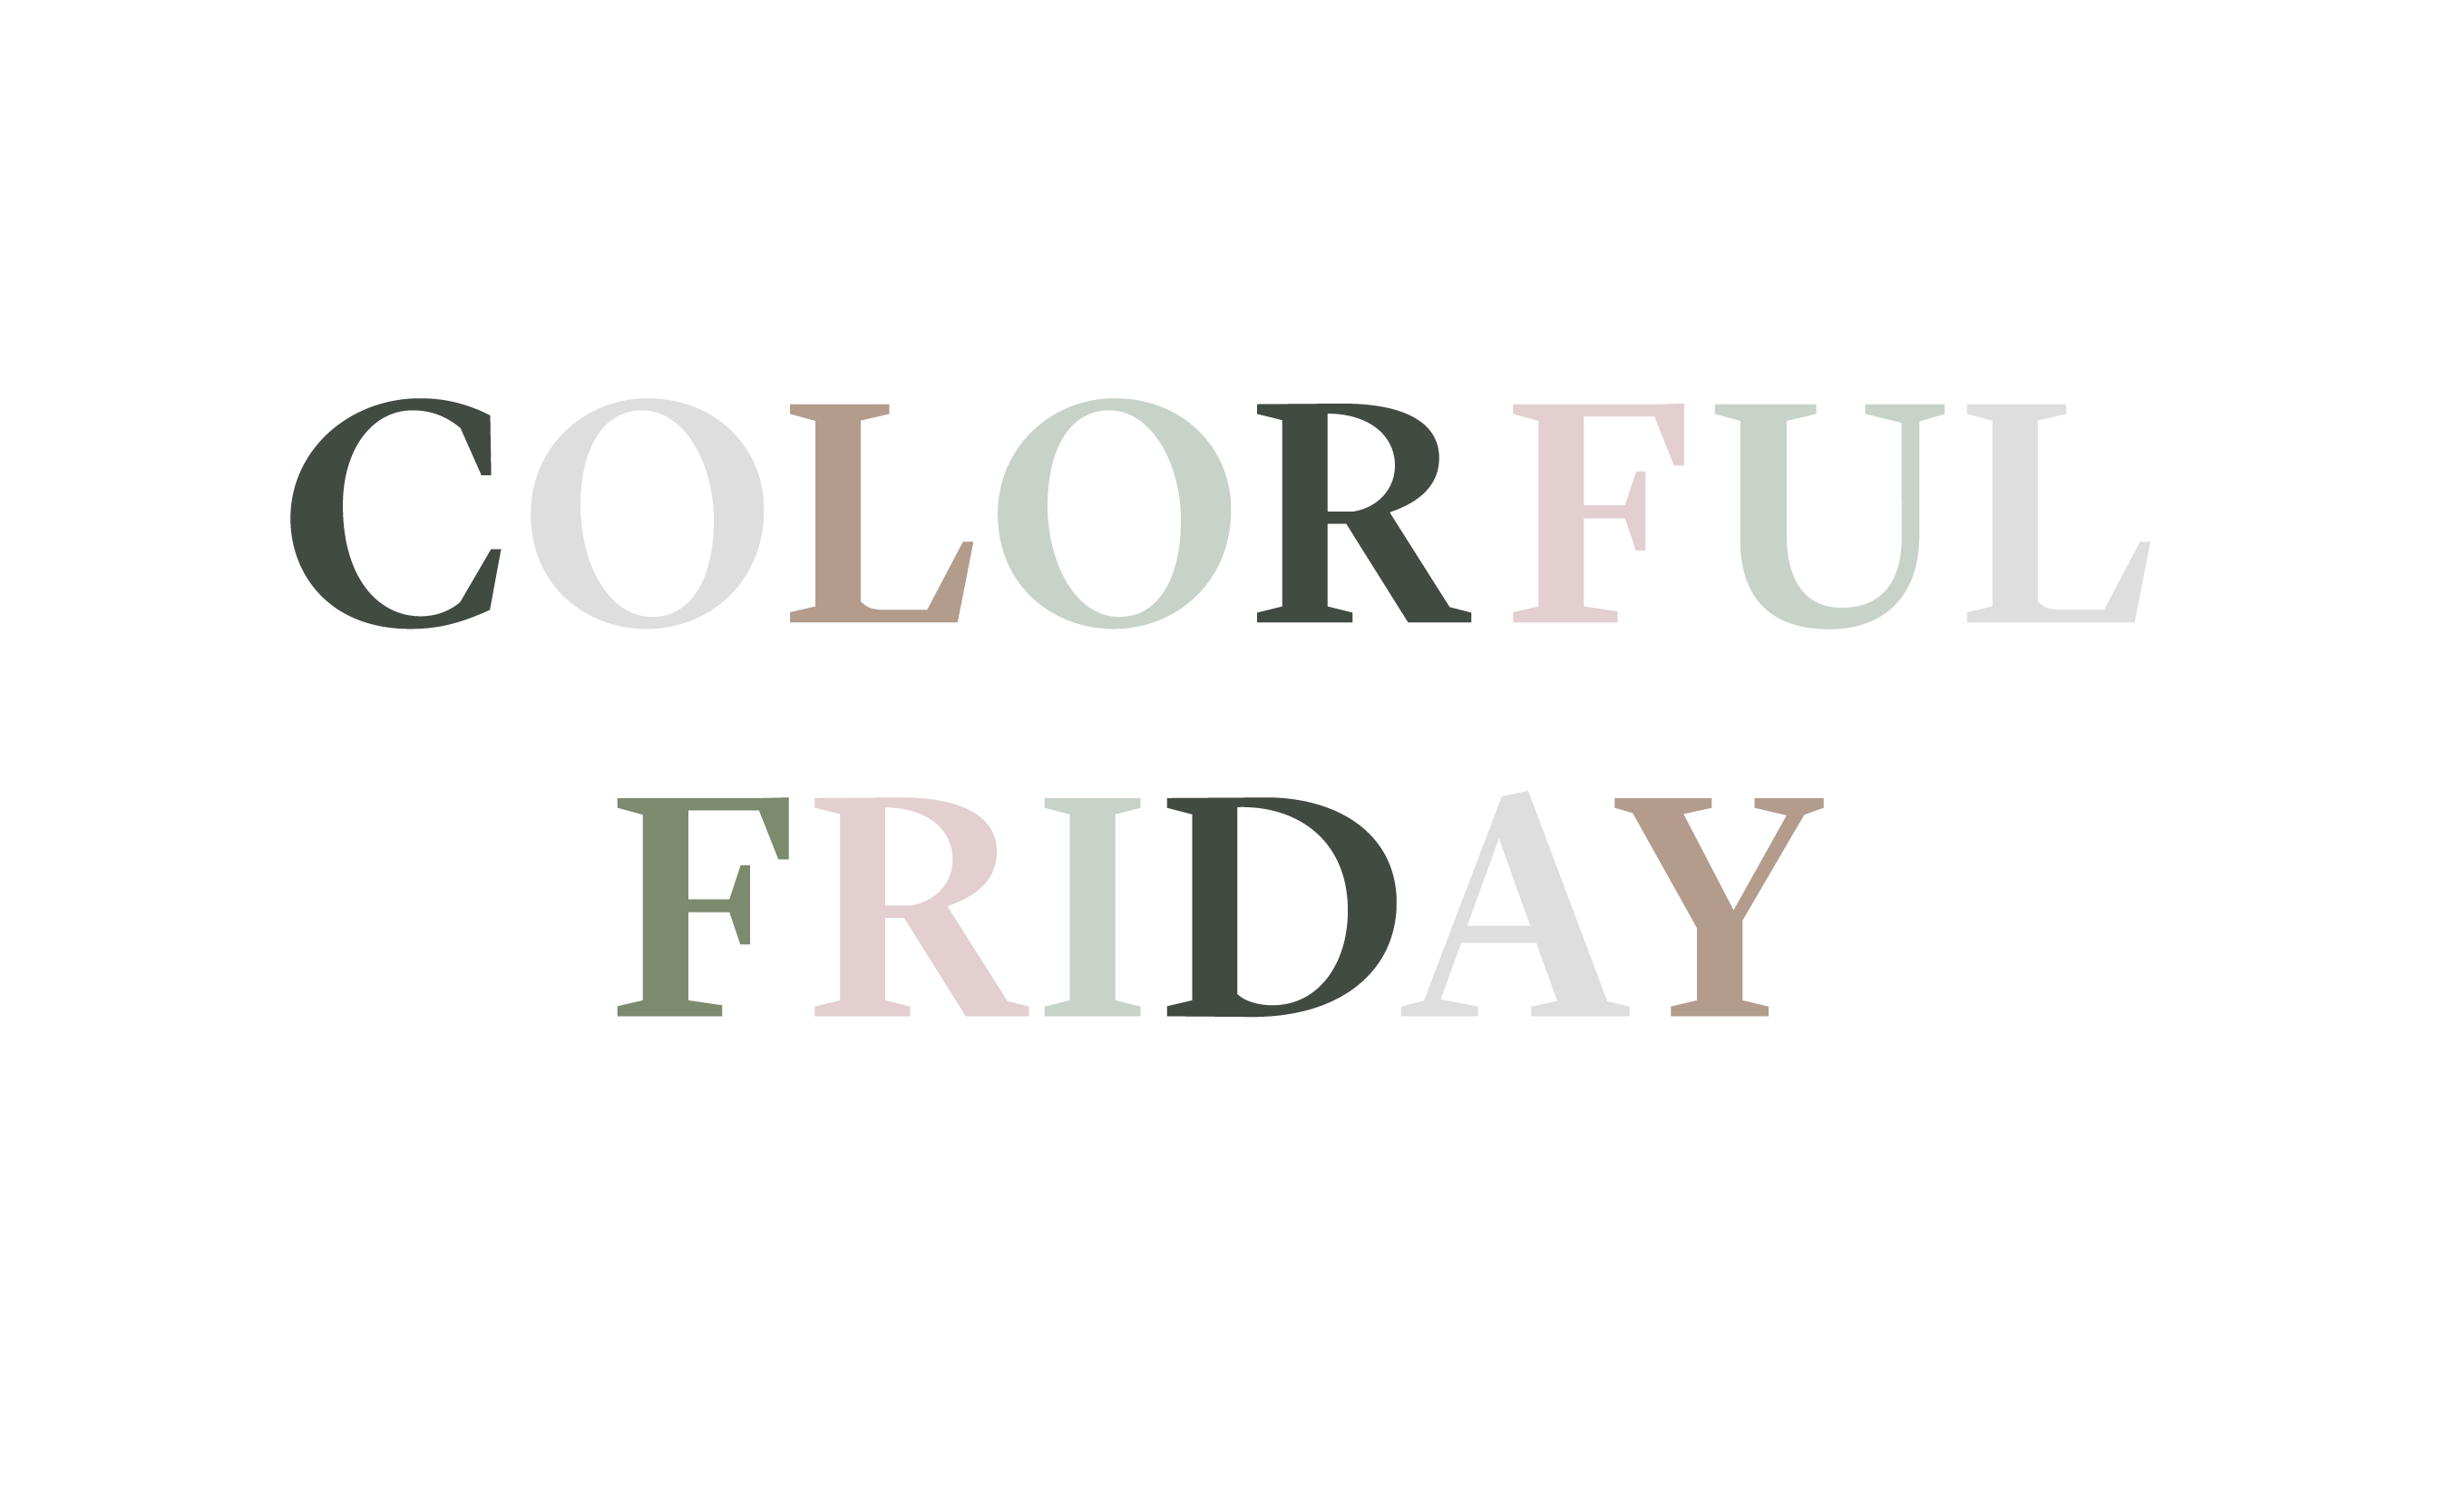 COLORFUL FRIDAY 2021